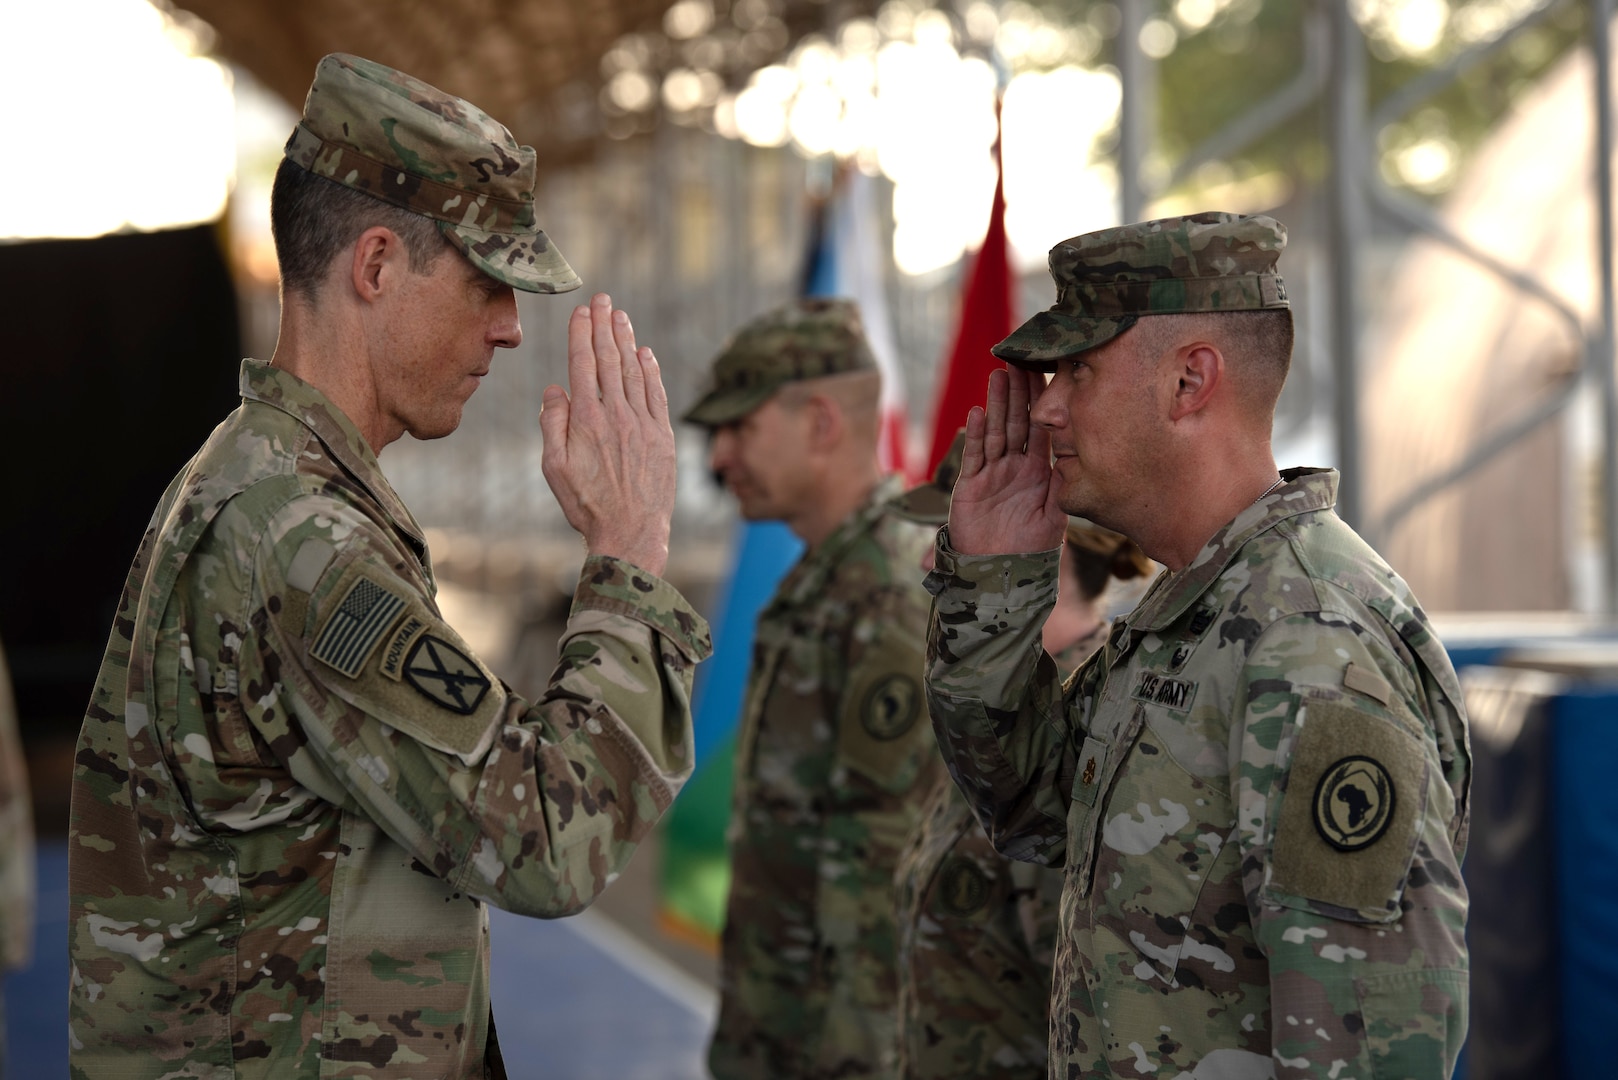 Maj. Gen. William Zana, commanding general of Combined Joint Task Force - Horn of Africa (CJTF-HOA), returns a salute to a member of the 404th Maneuver Enhancement Brigade after placing a newly earned combat patch on the Soldier,